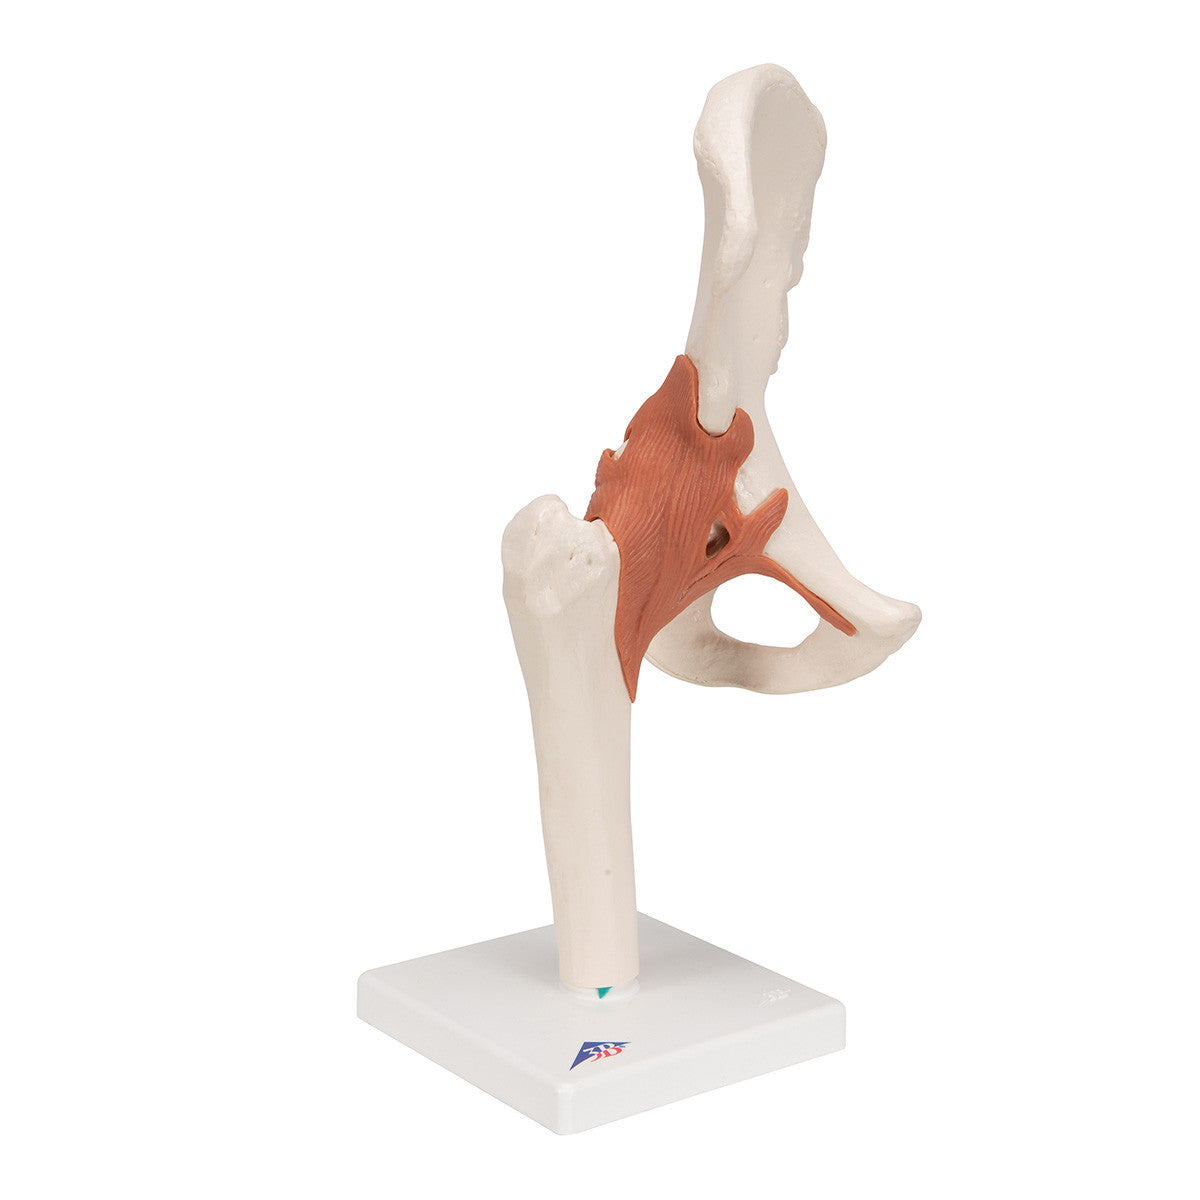 Functional Hip joint